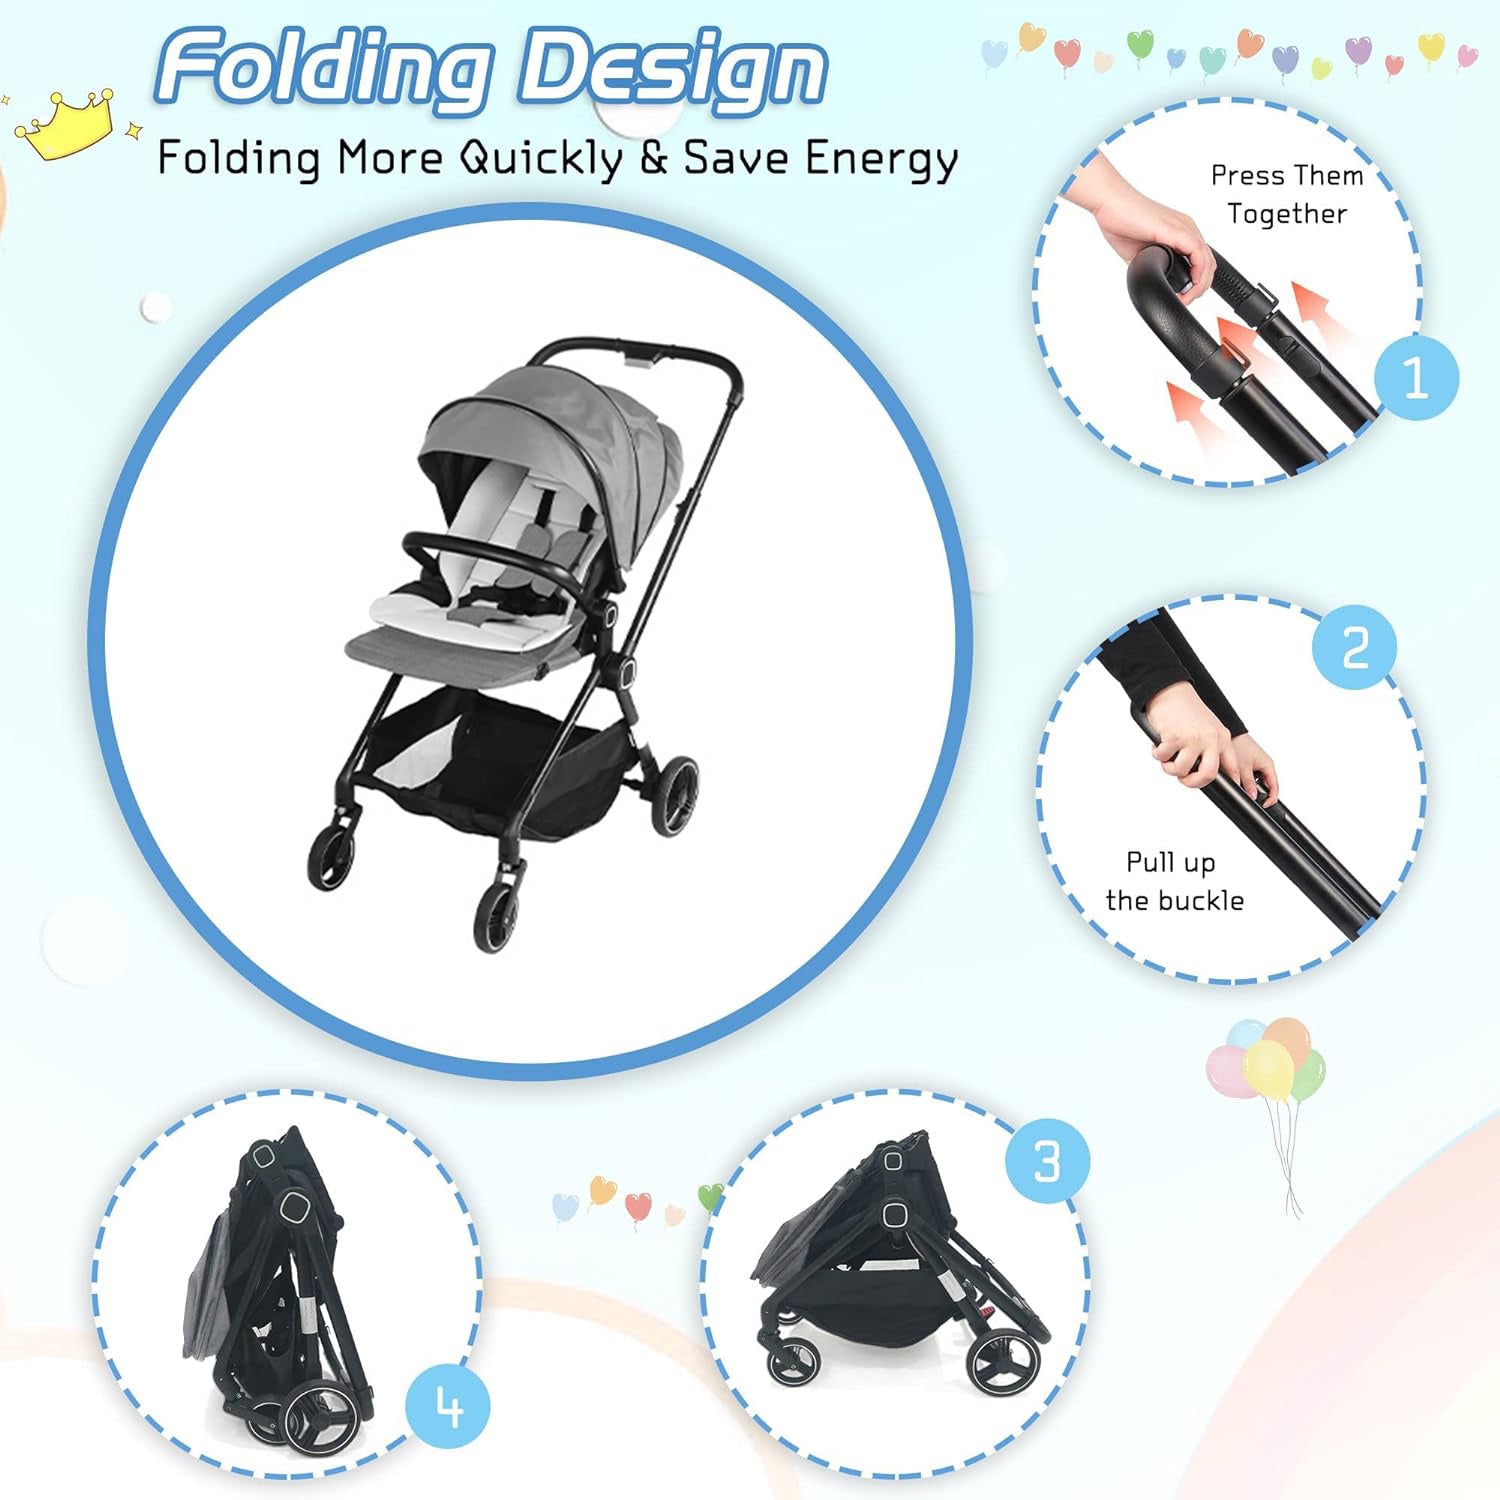 Easy Fold Baby Stroller Lightweight High Landscape Infant Pushchair with Reversible Seat, Gray